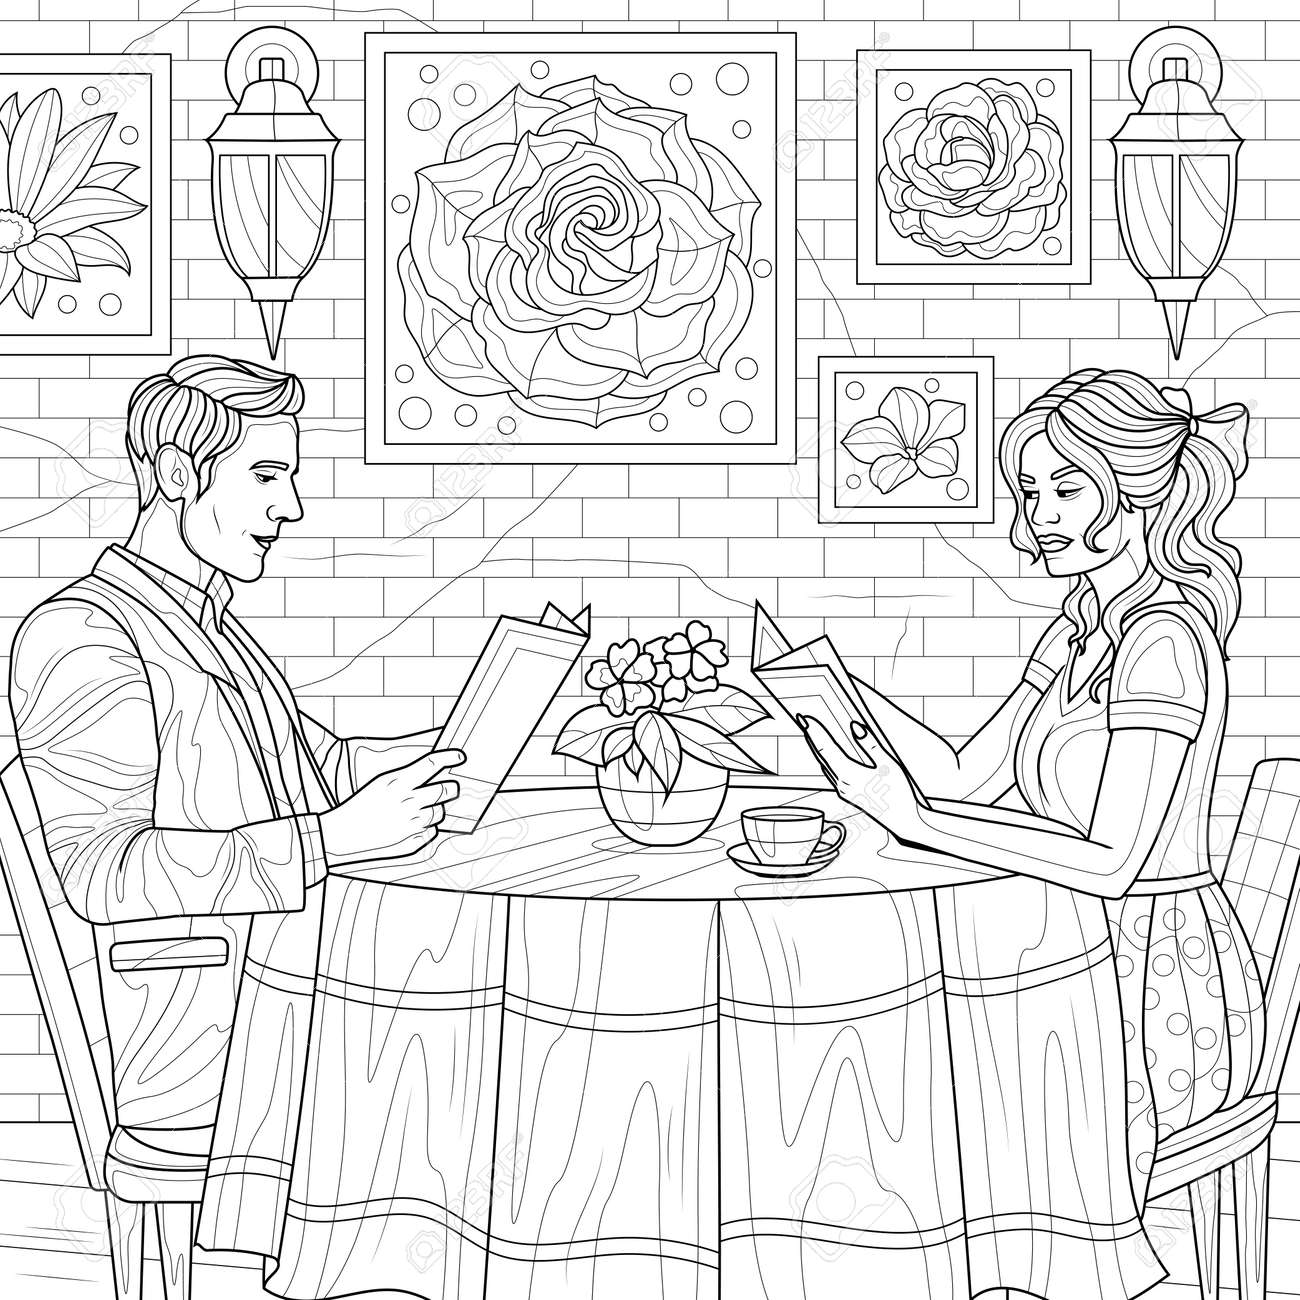 Guy and girl in a restaurantcoloring book antistress for children and adults royalty free svg cliparts vectors and stock illustration image